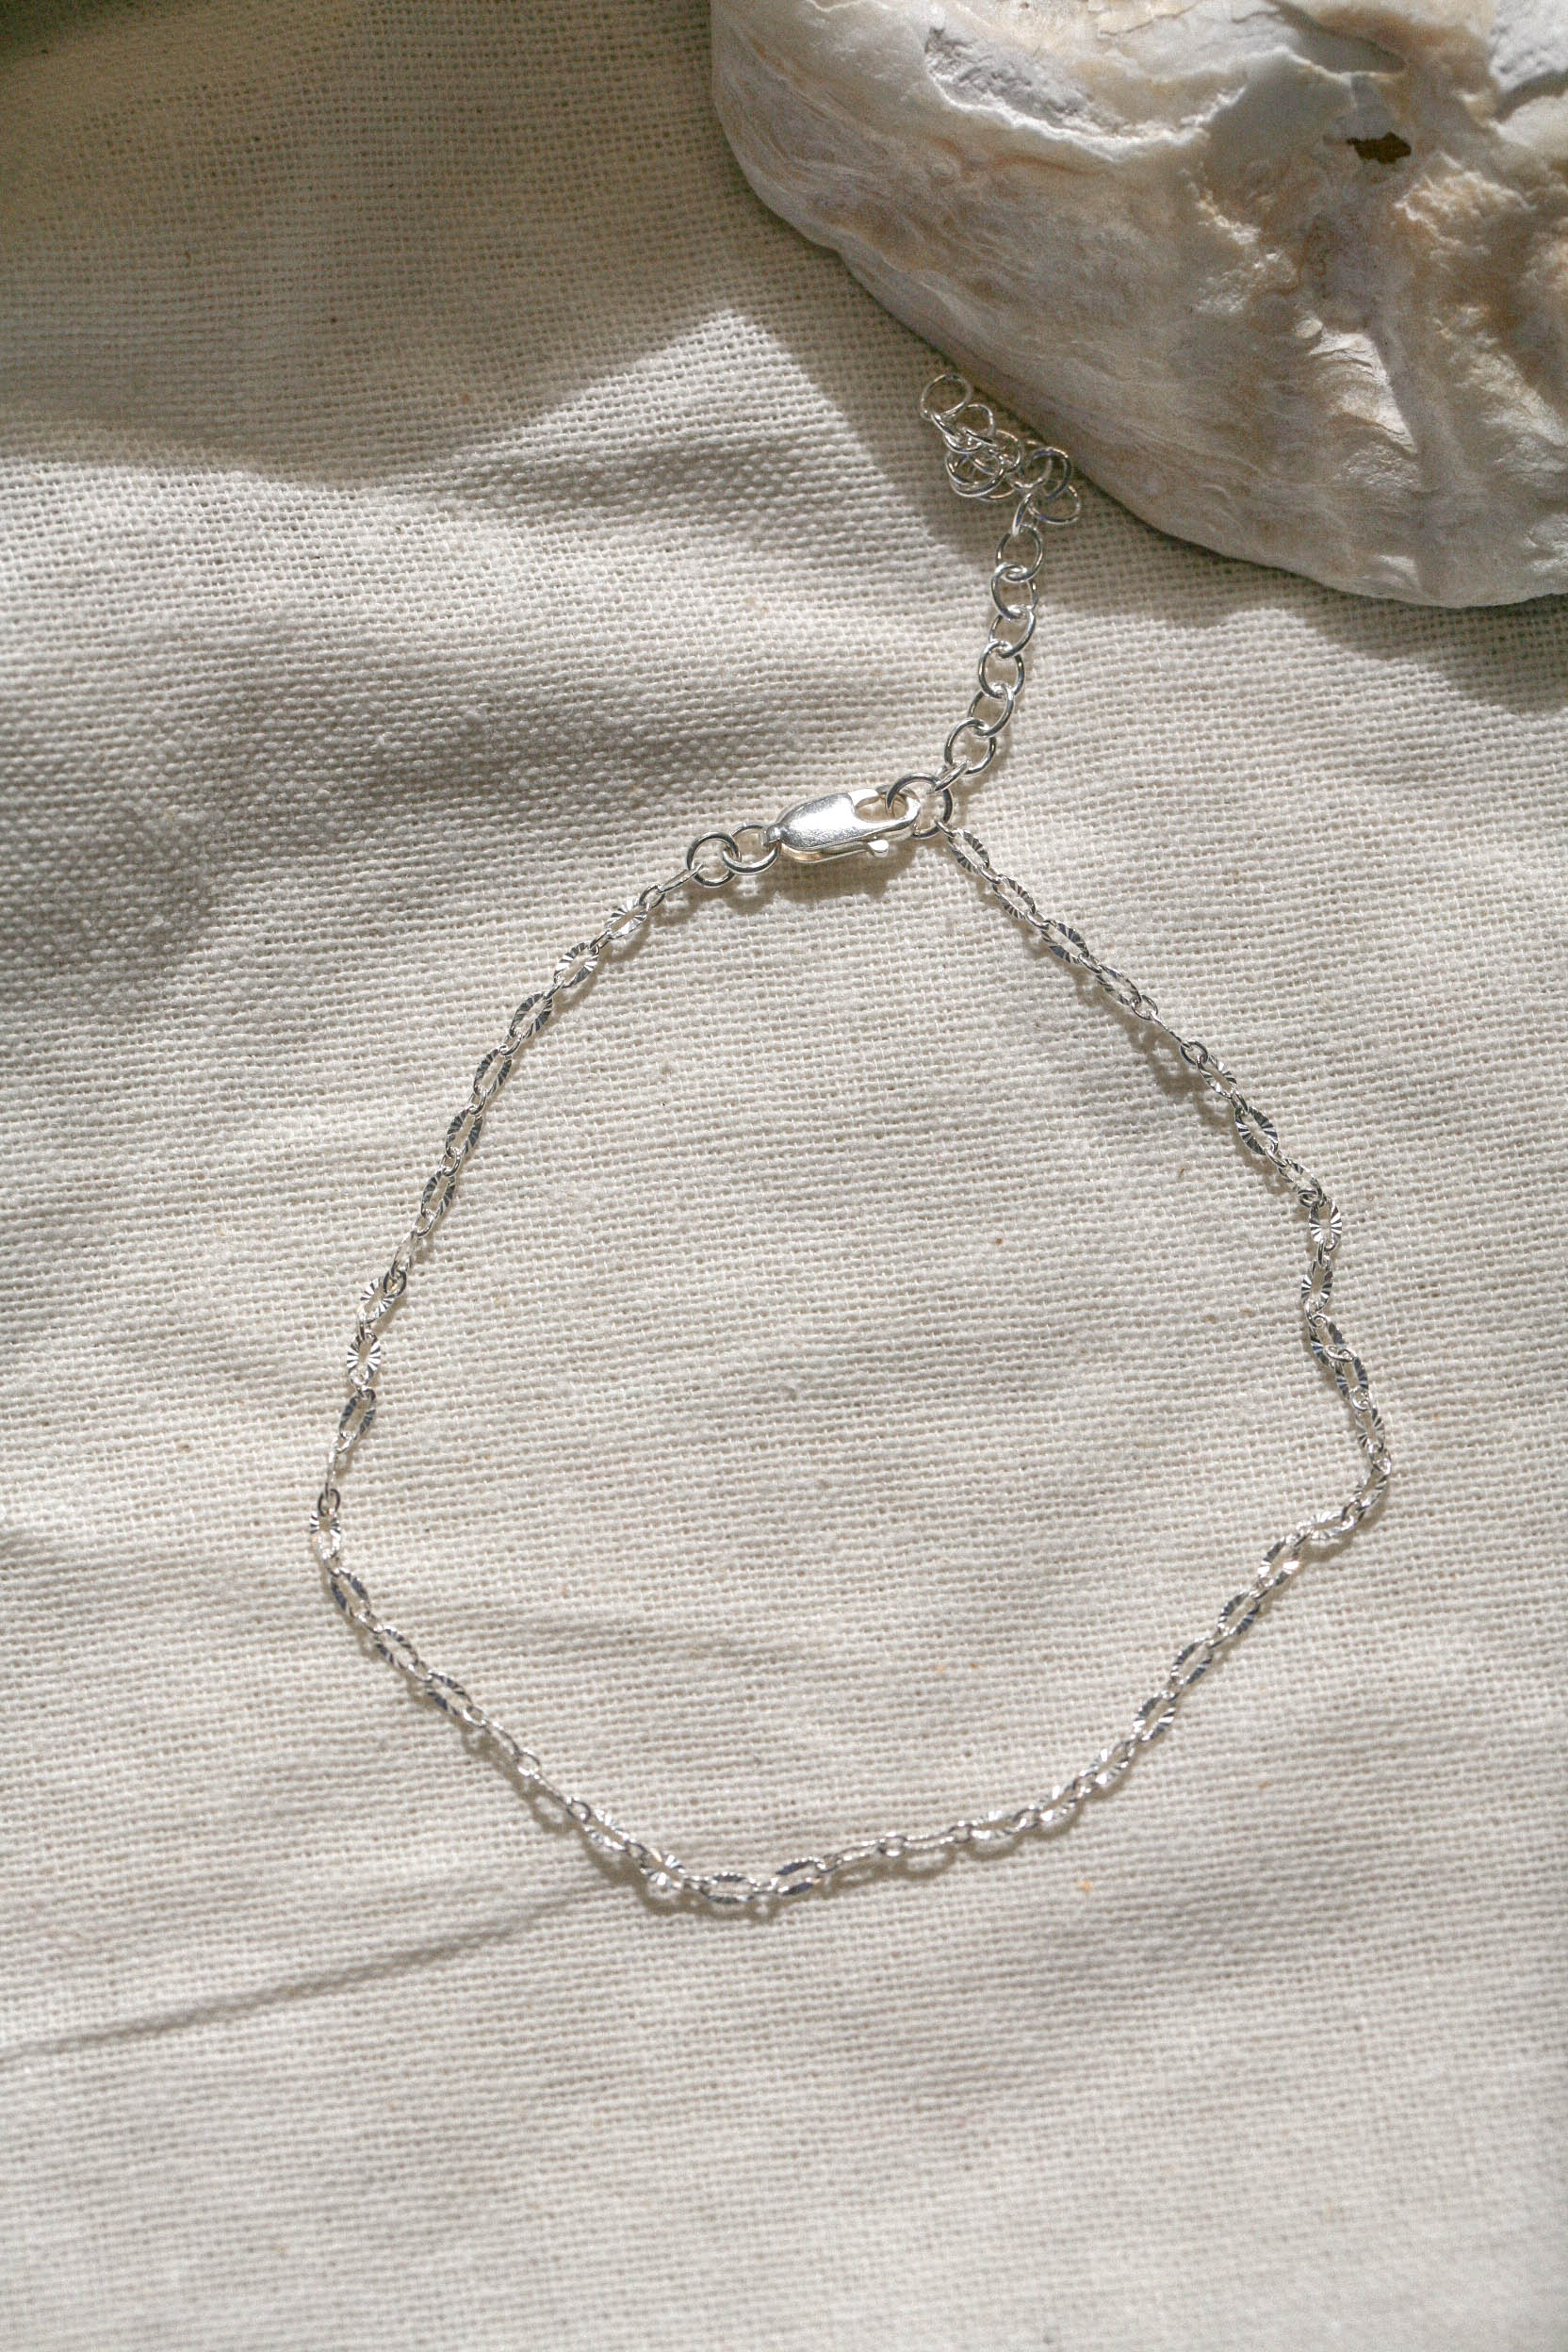 Anklet patterned chain